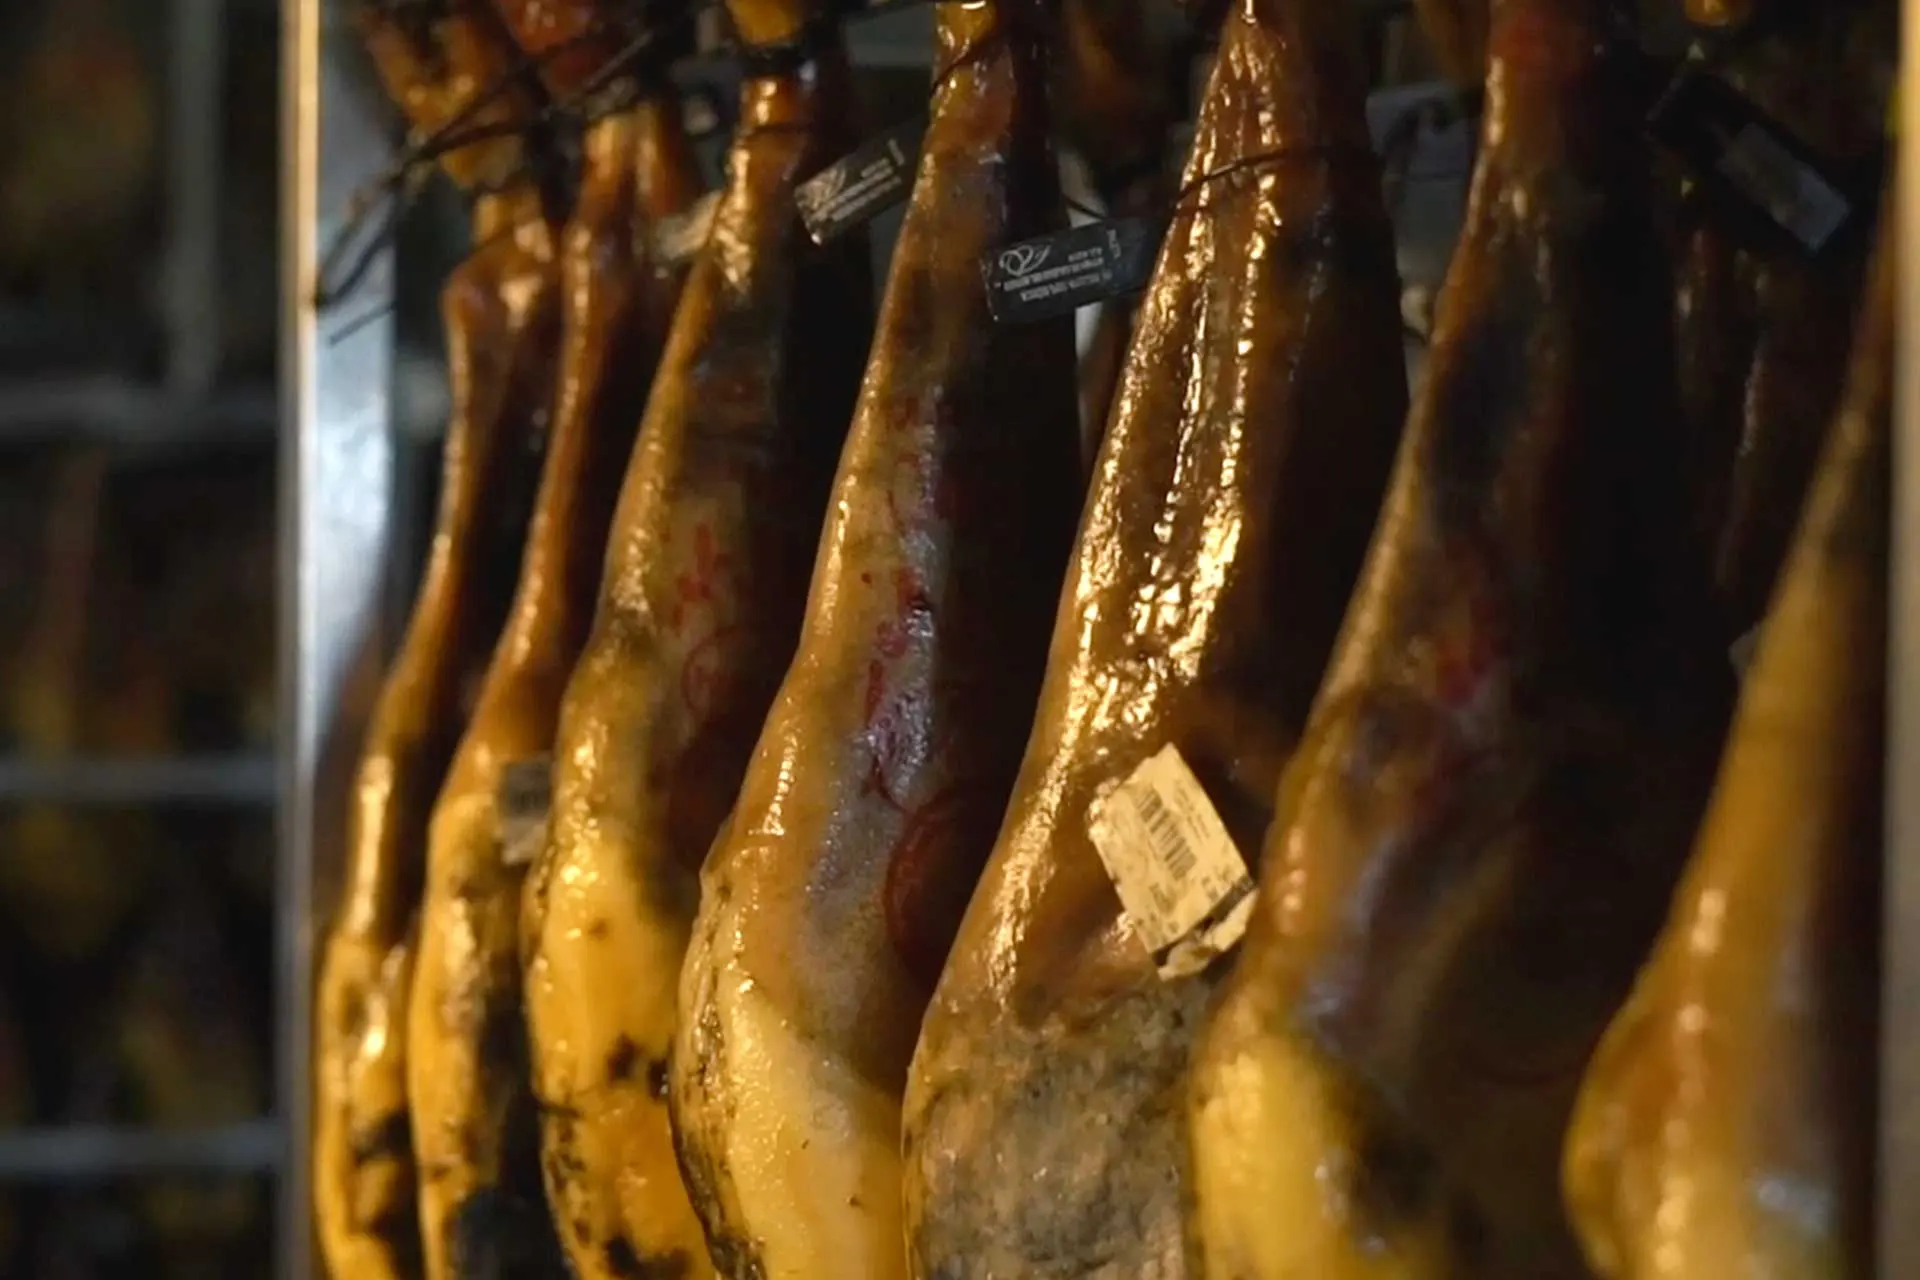 Fermín Iberico a Cut Above Curing, part of the magic of the artisan process